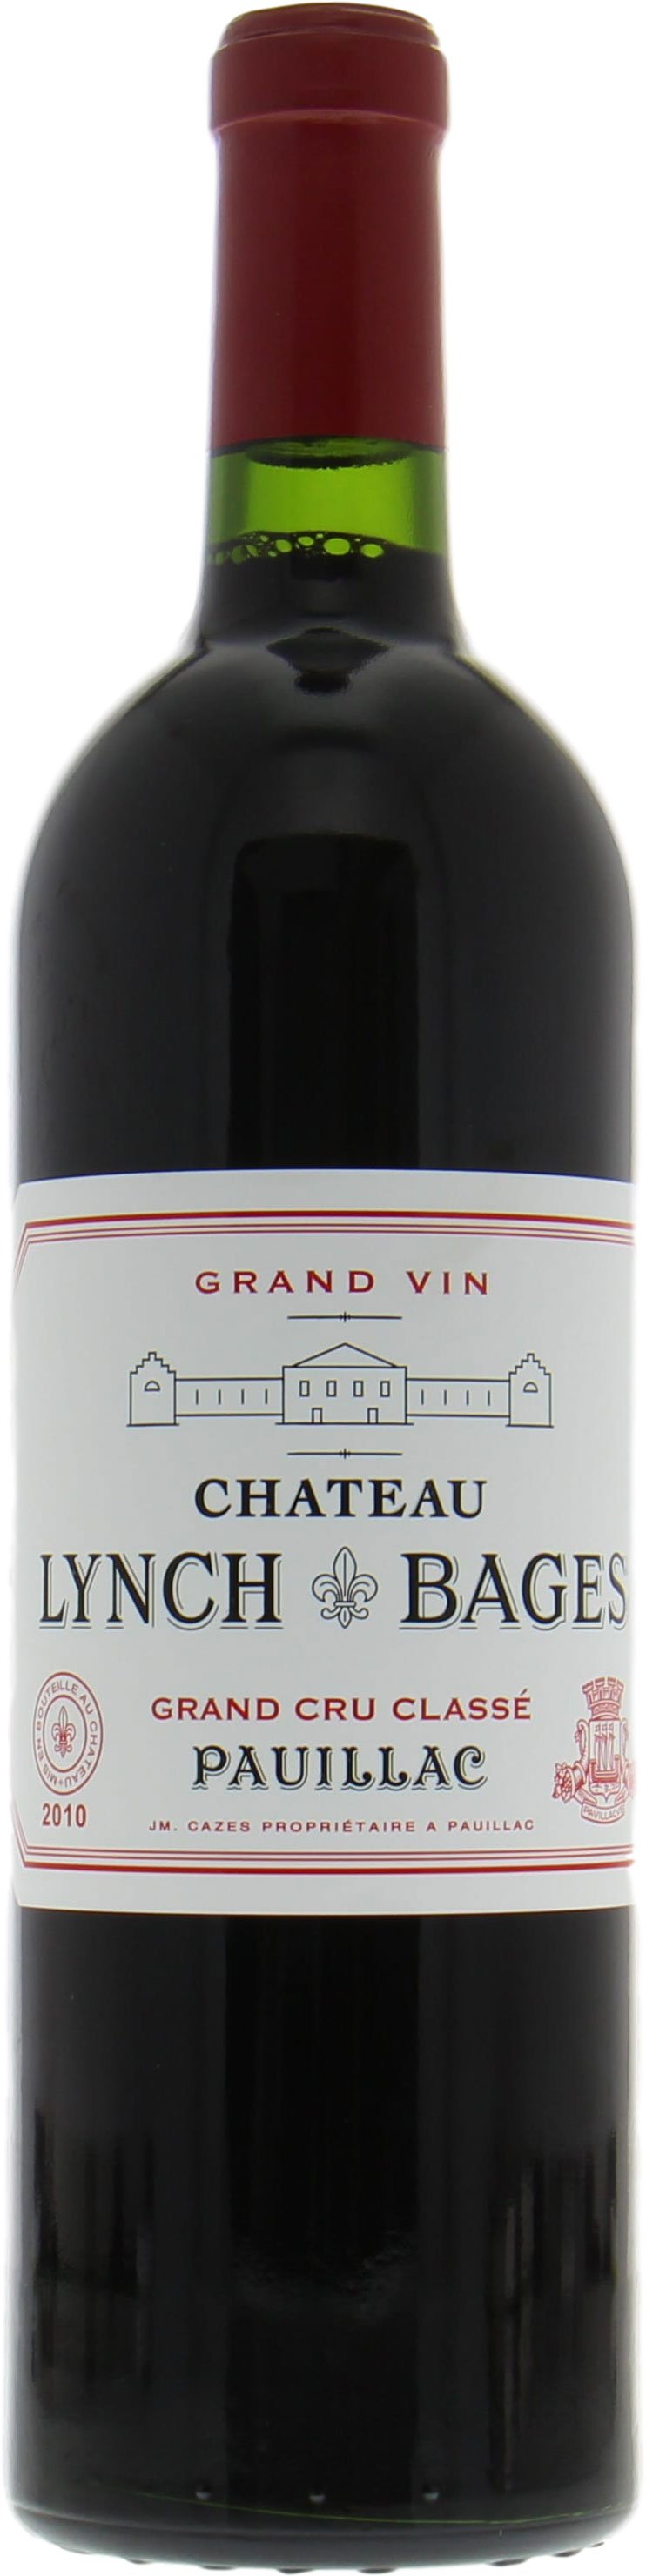 Chateau Lynch Bages - Chateau Lynch Bages 2010 From Original Wooden Case